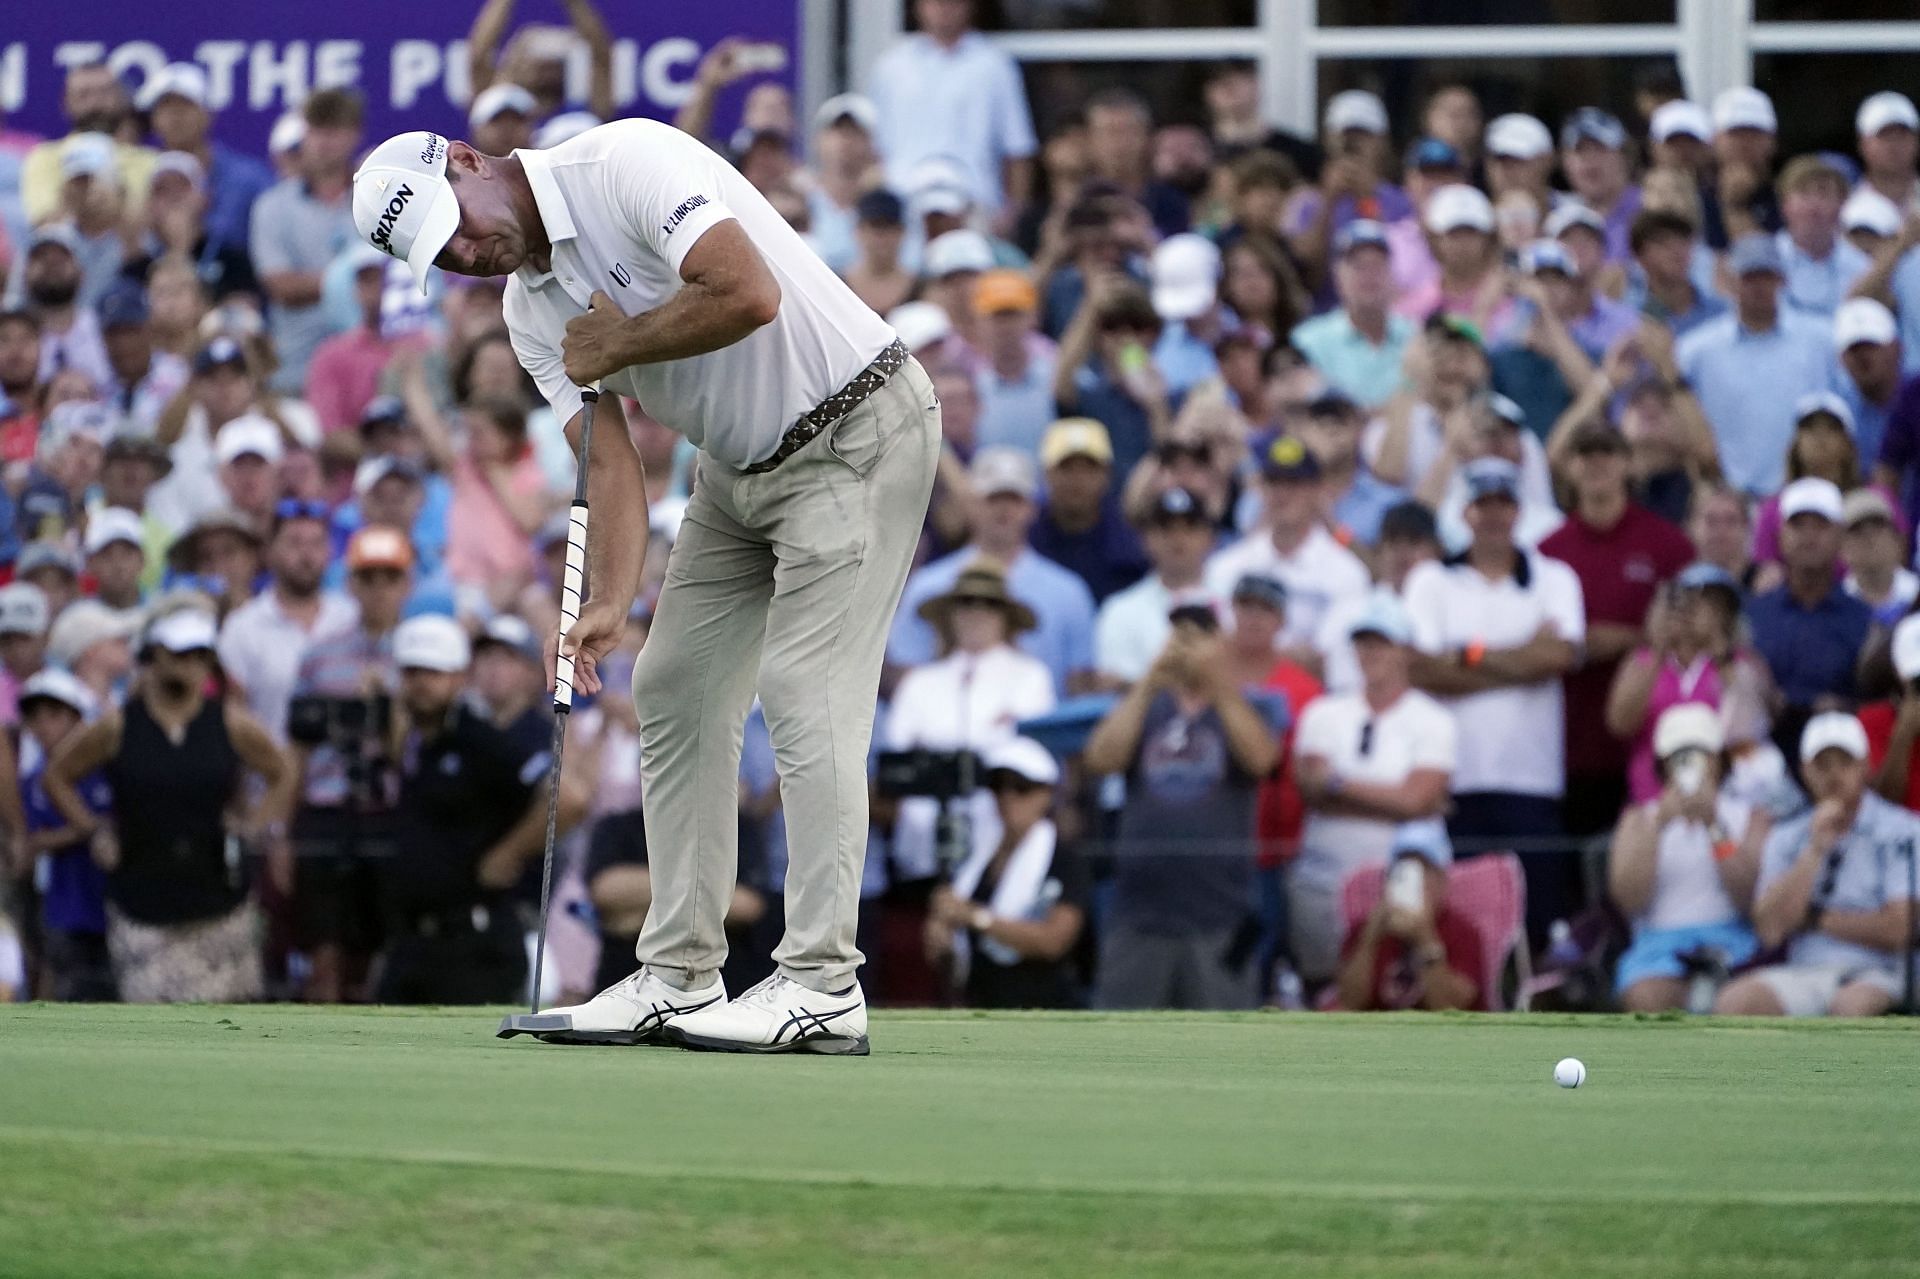 Could a putter change be the key to Lucas Glover's victories at the